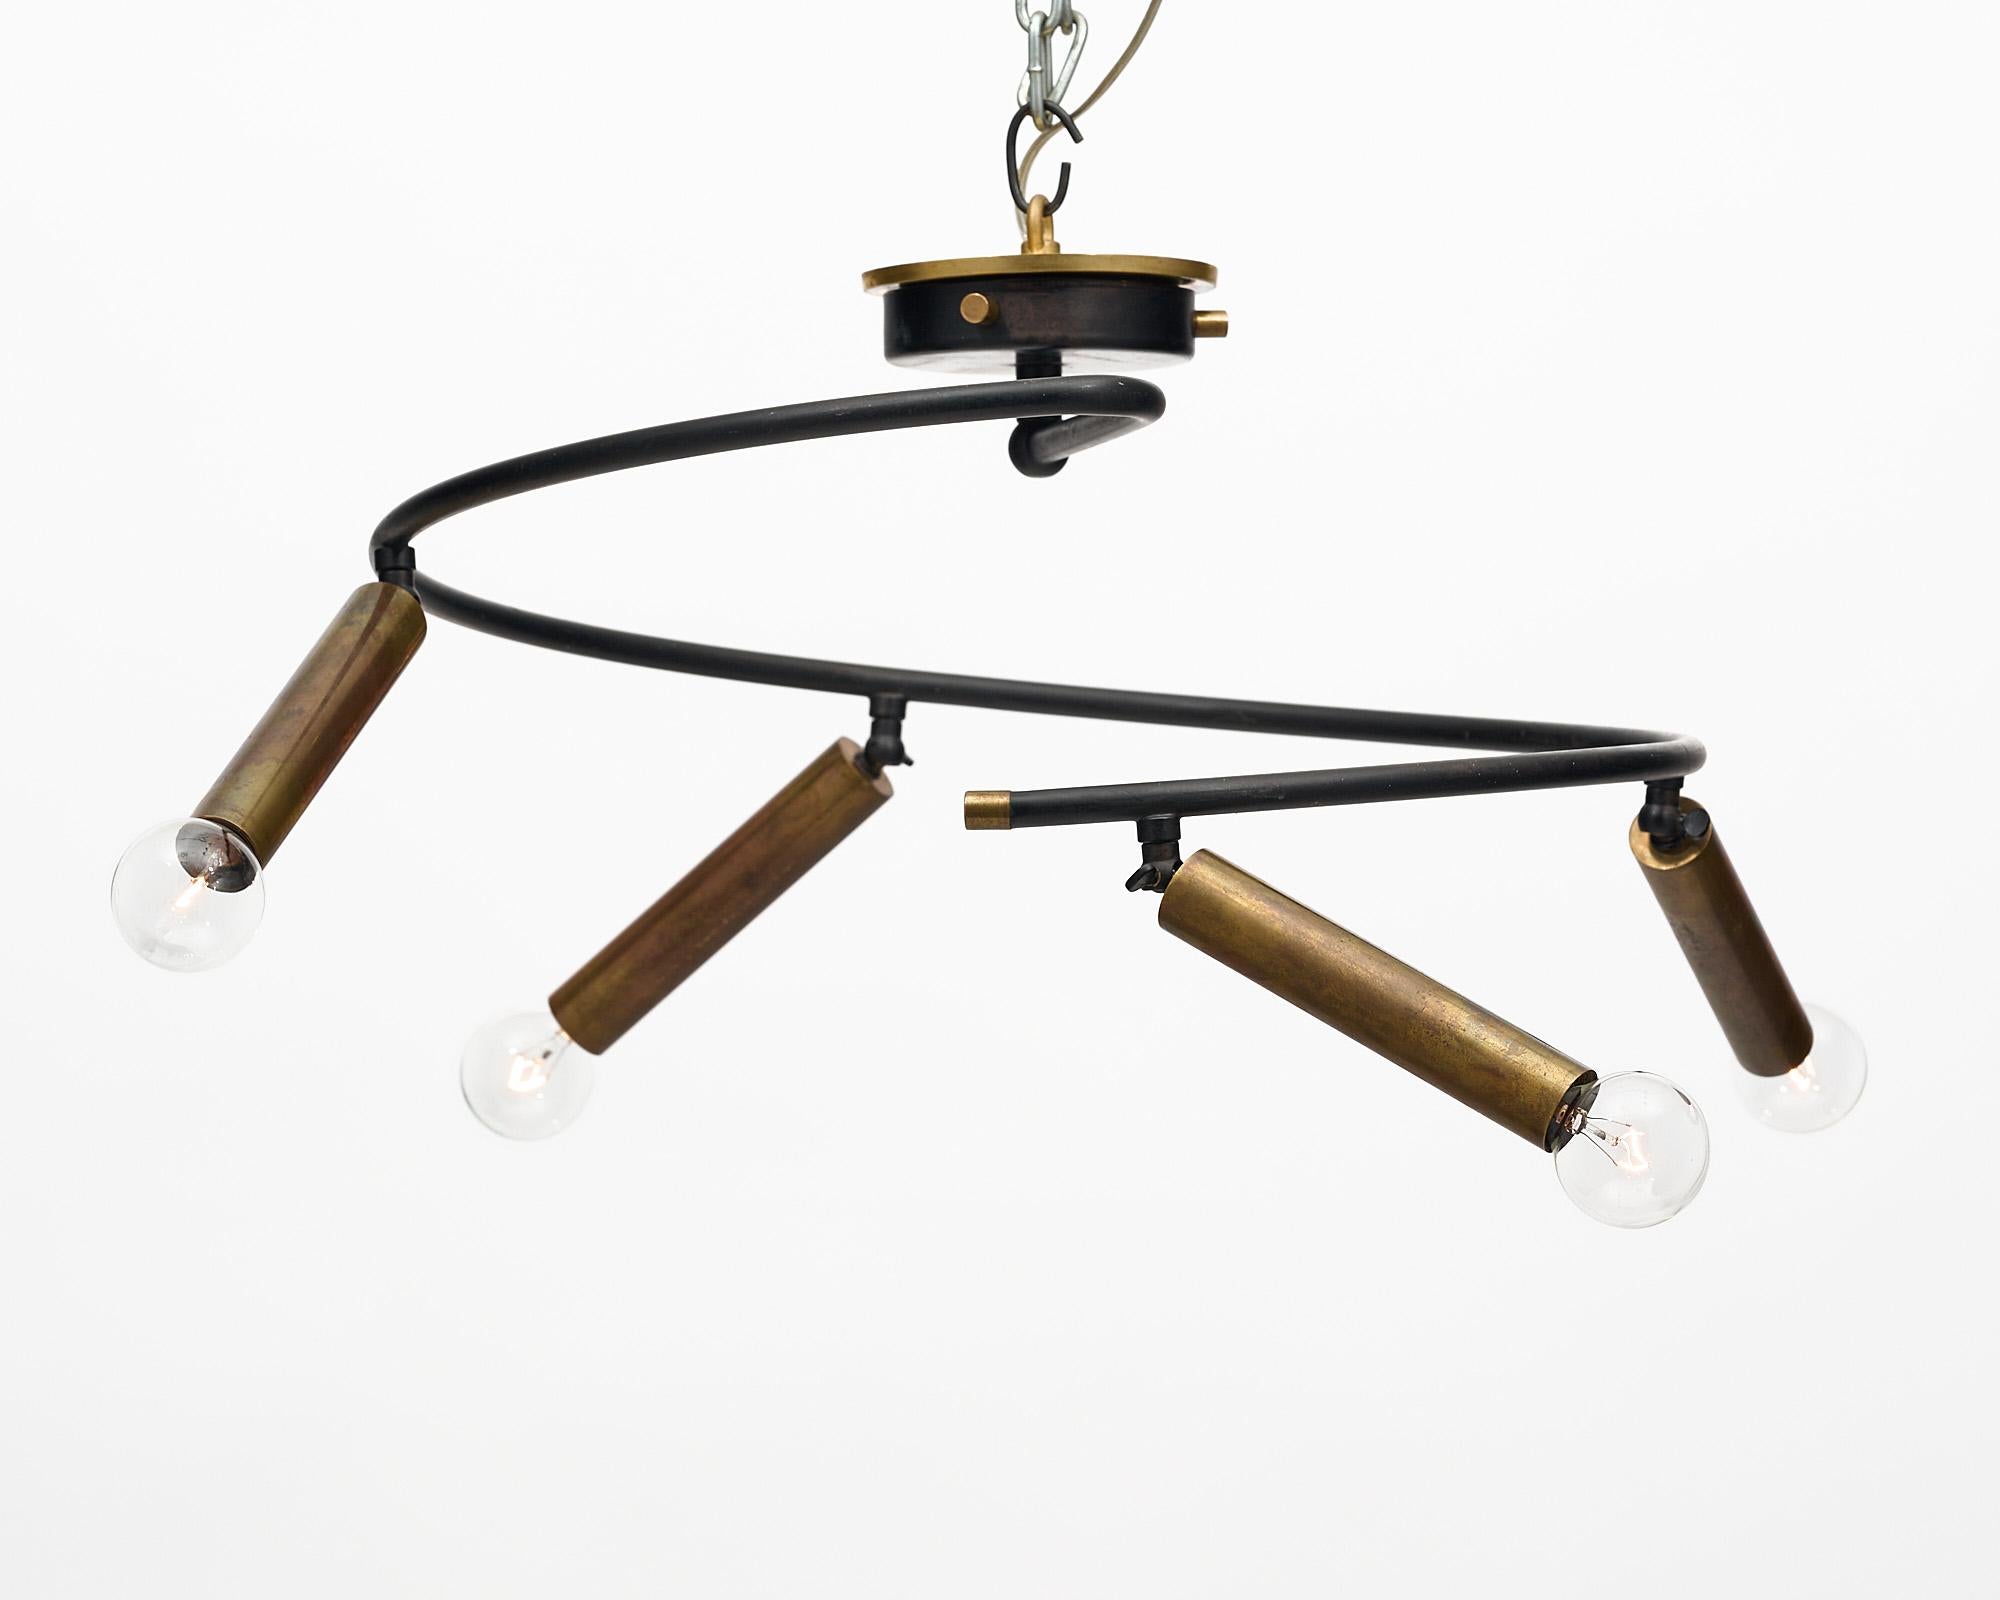 Ceiling fixture, Italian, by Giampiero Aloi for Lumi Production made of lacquered metal and gilded brass, circa 1960, Italy.